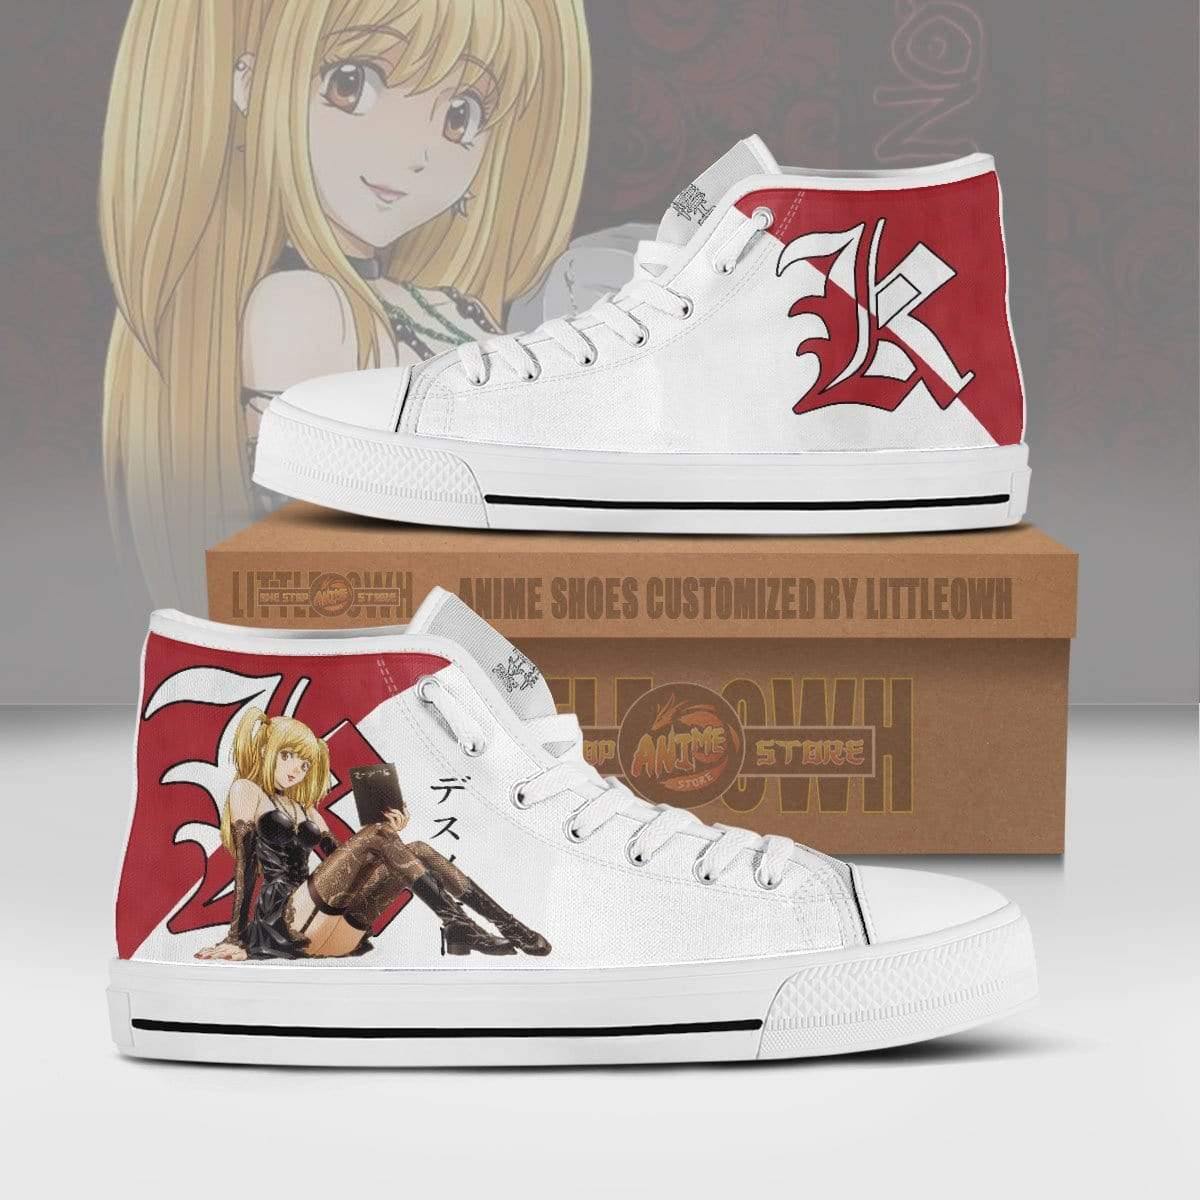 Misa Amane High Top Canvas Shoes Custom Death Note Anime Sneakers